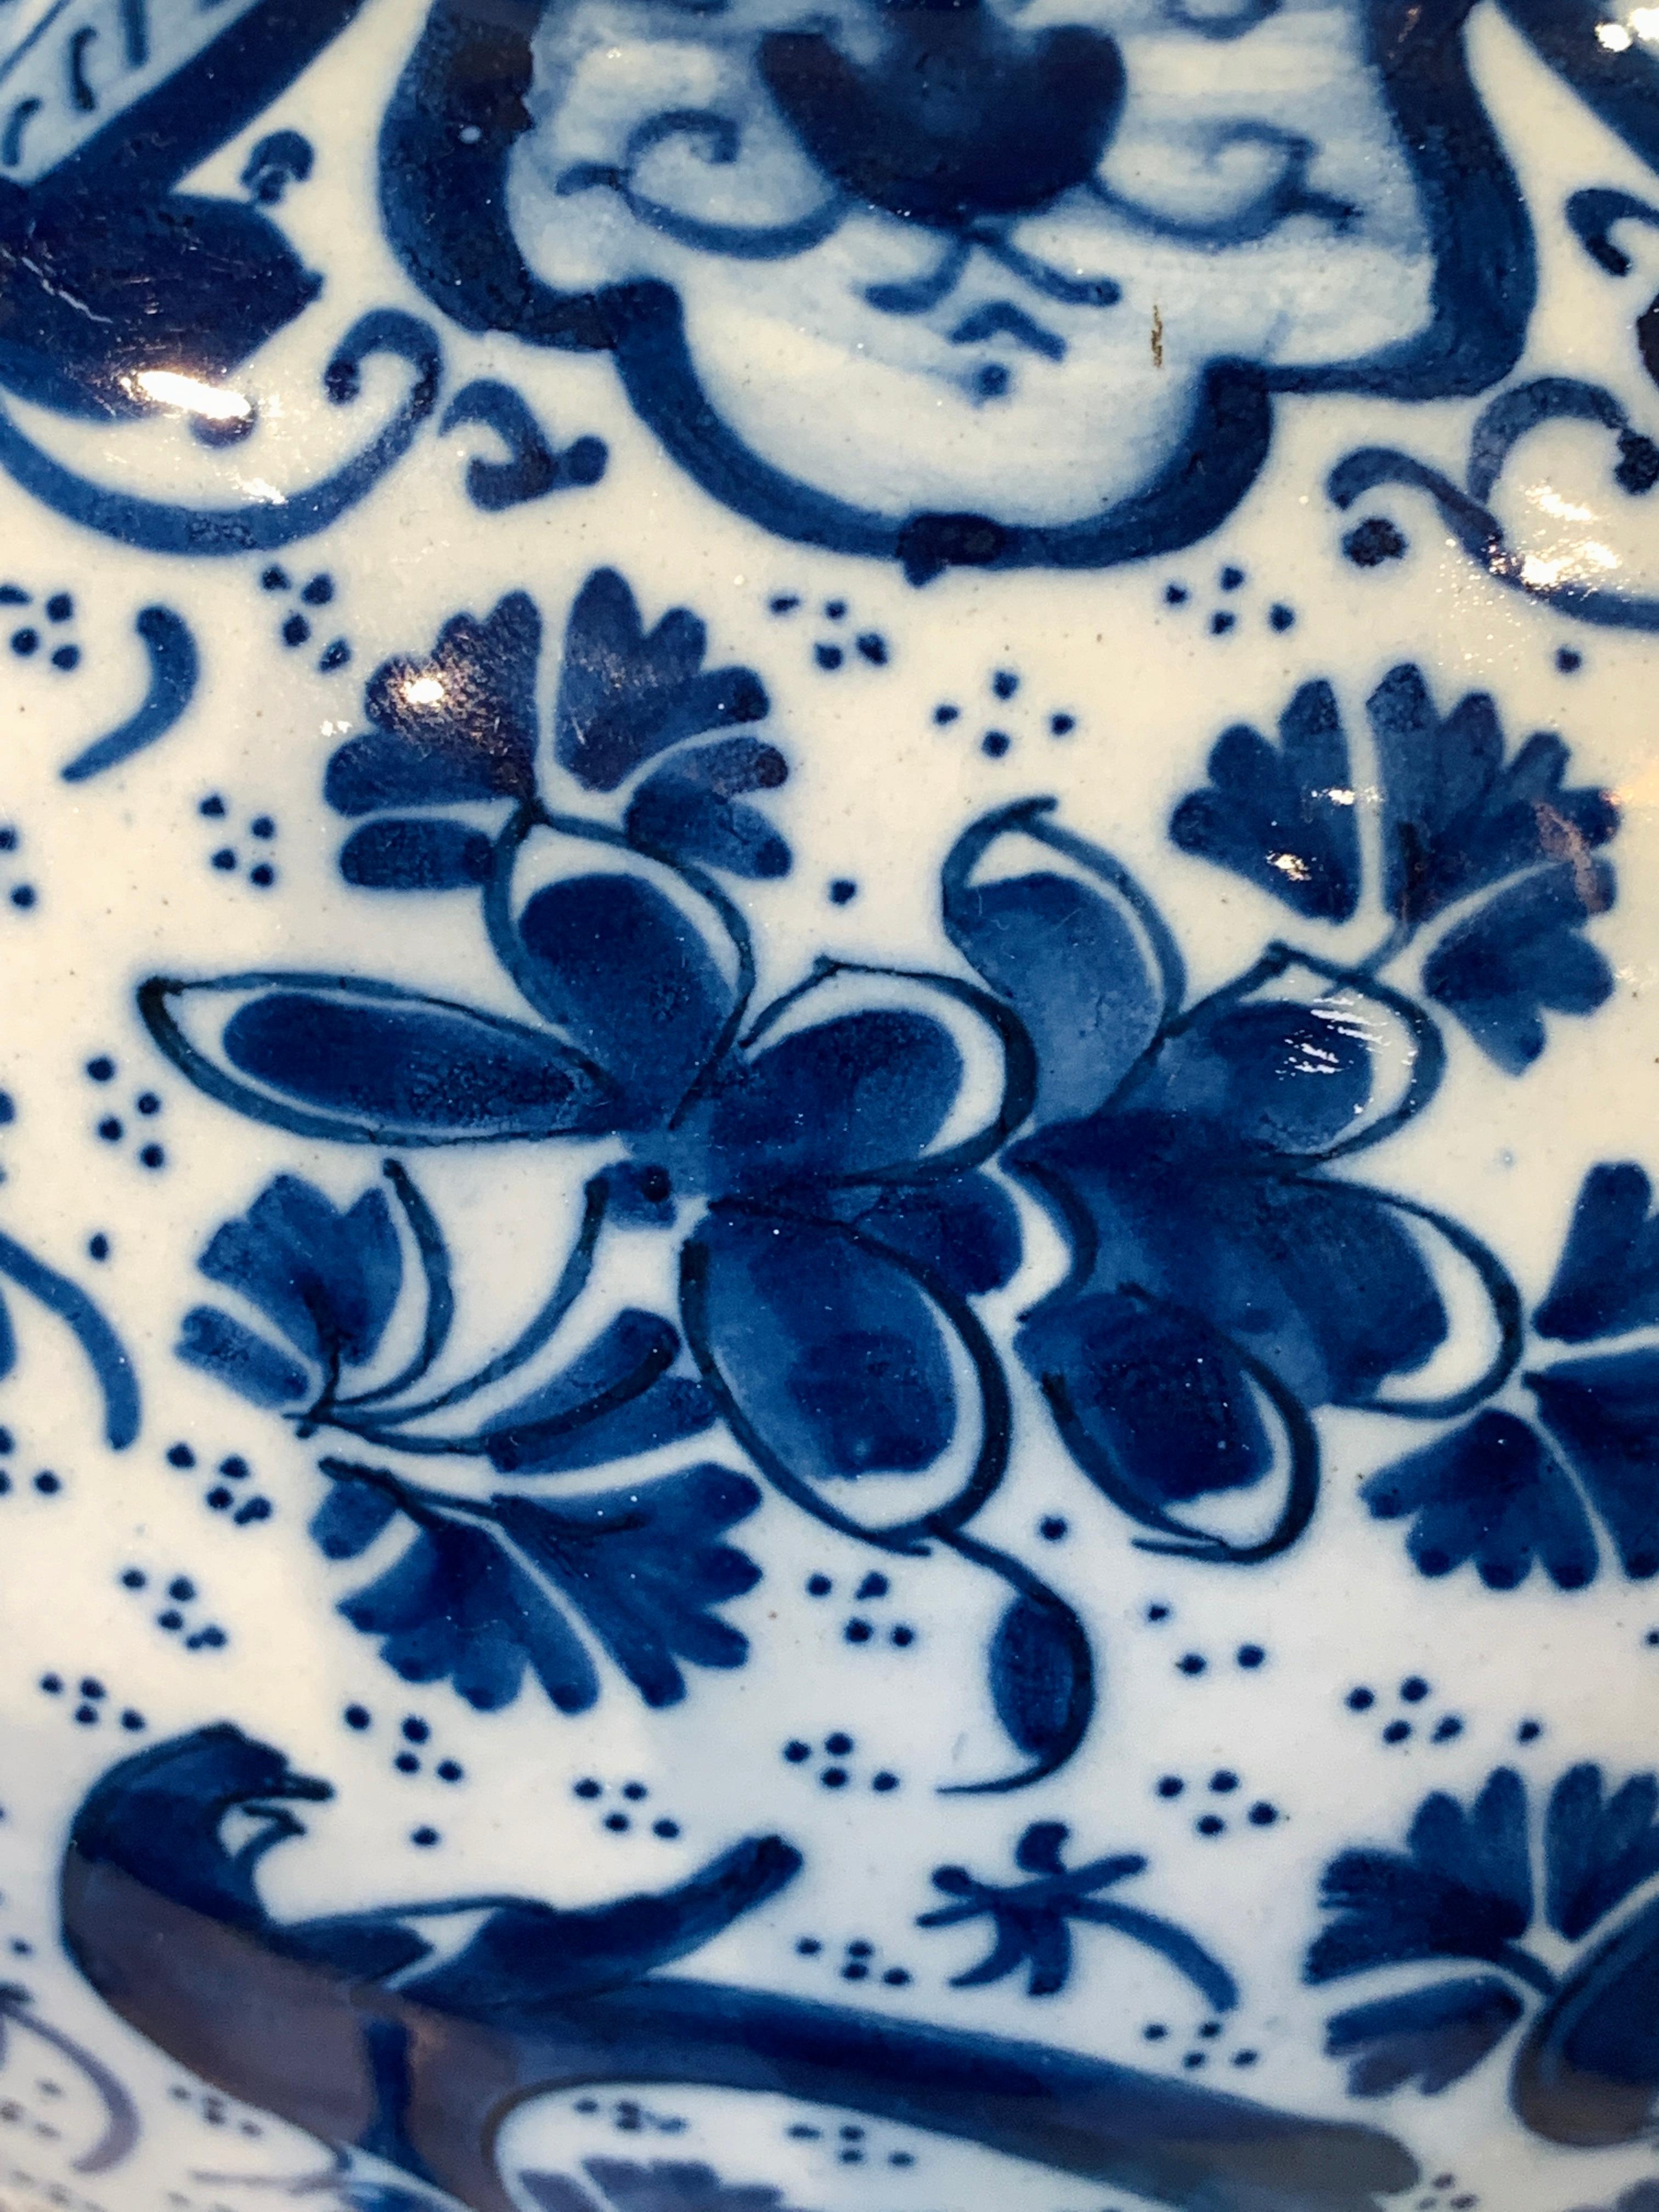 This beautiful Dutch Delft covered jar is hand-painted in cobalt blue with an exquisite overall pattern showing a songbird among flowers. The vase was made early in the 18th century, circa 1700-1716, in the De Drie Astonne factory owned and run by